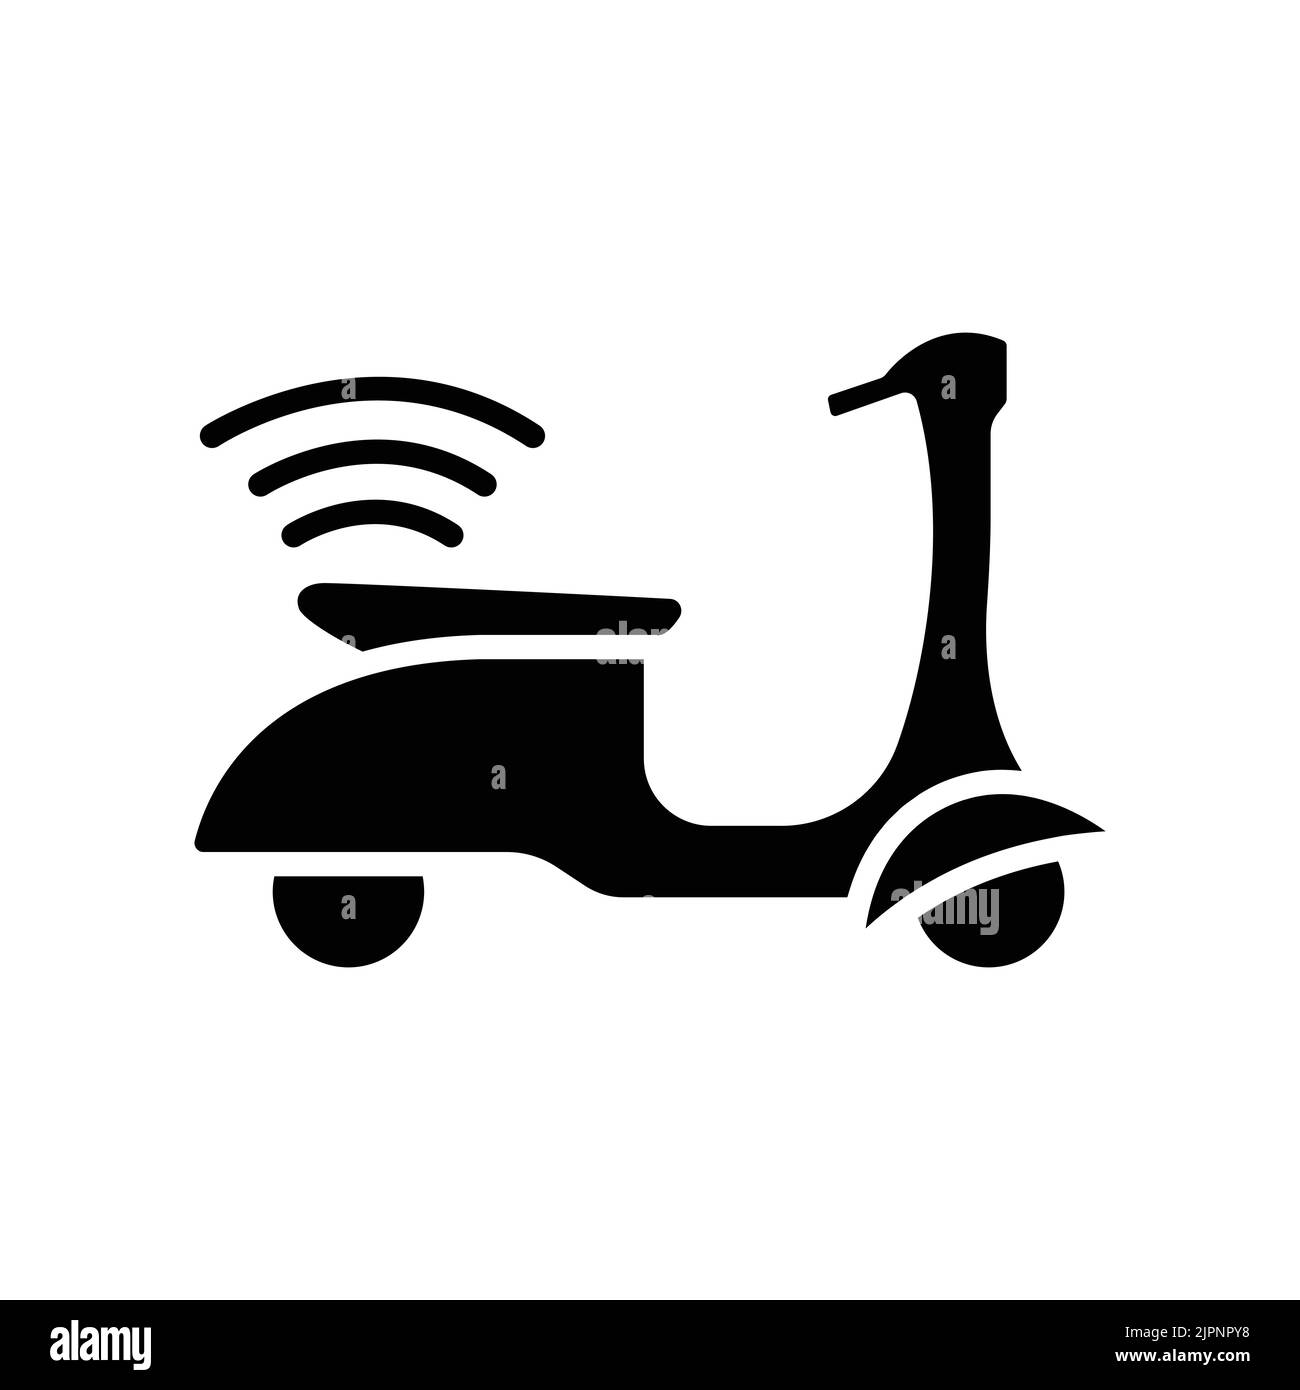 Scooter icon with signal. icon related to technology. smart device. transport device. Glyph icon style, solid. Simple design editable Stock Vector